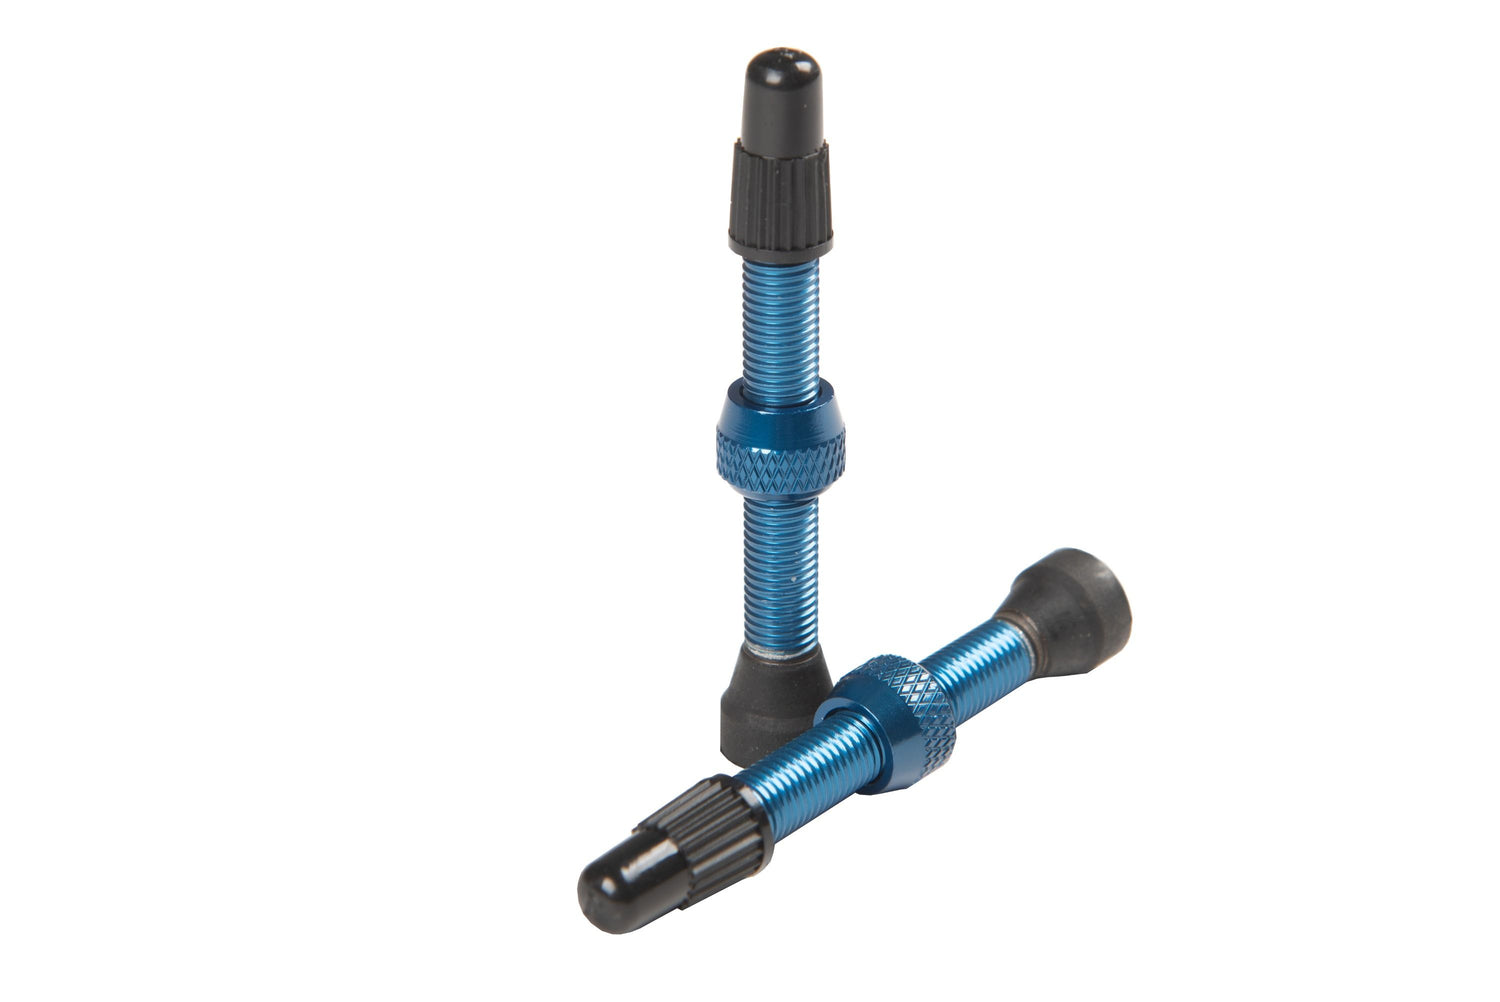 Stan's No Tubes Tubeless Valve Stems Presta Valve in Blue Finish Color | Bicycle Tubeless Technology from Sprocket Kings